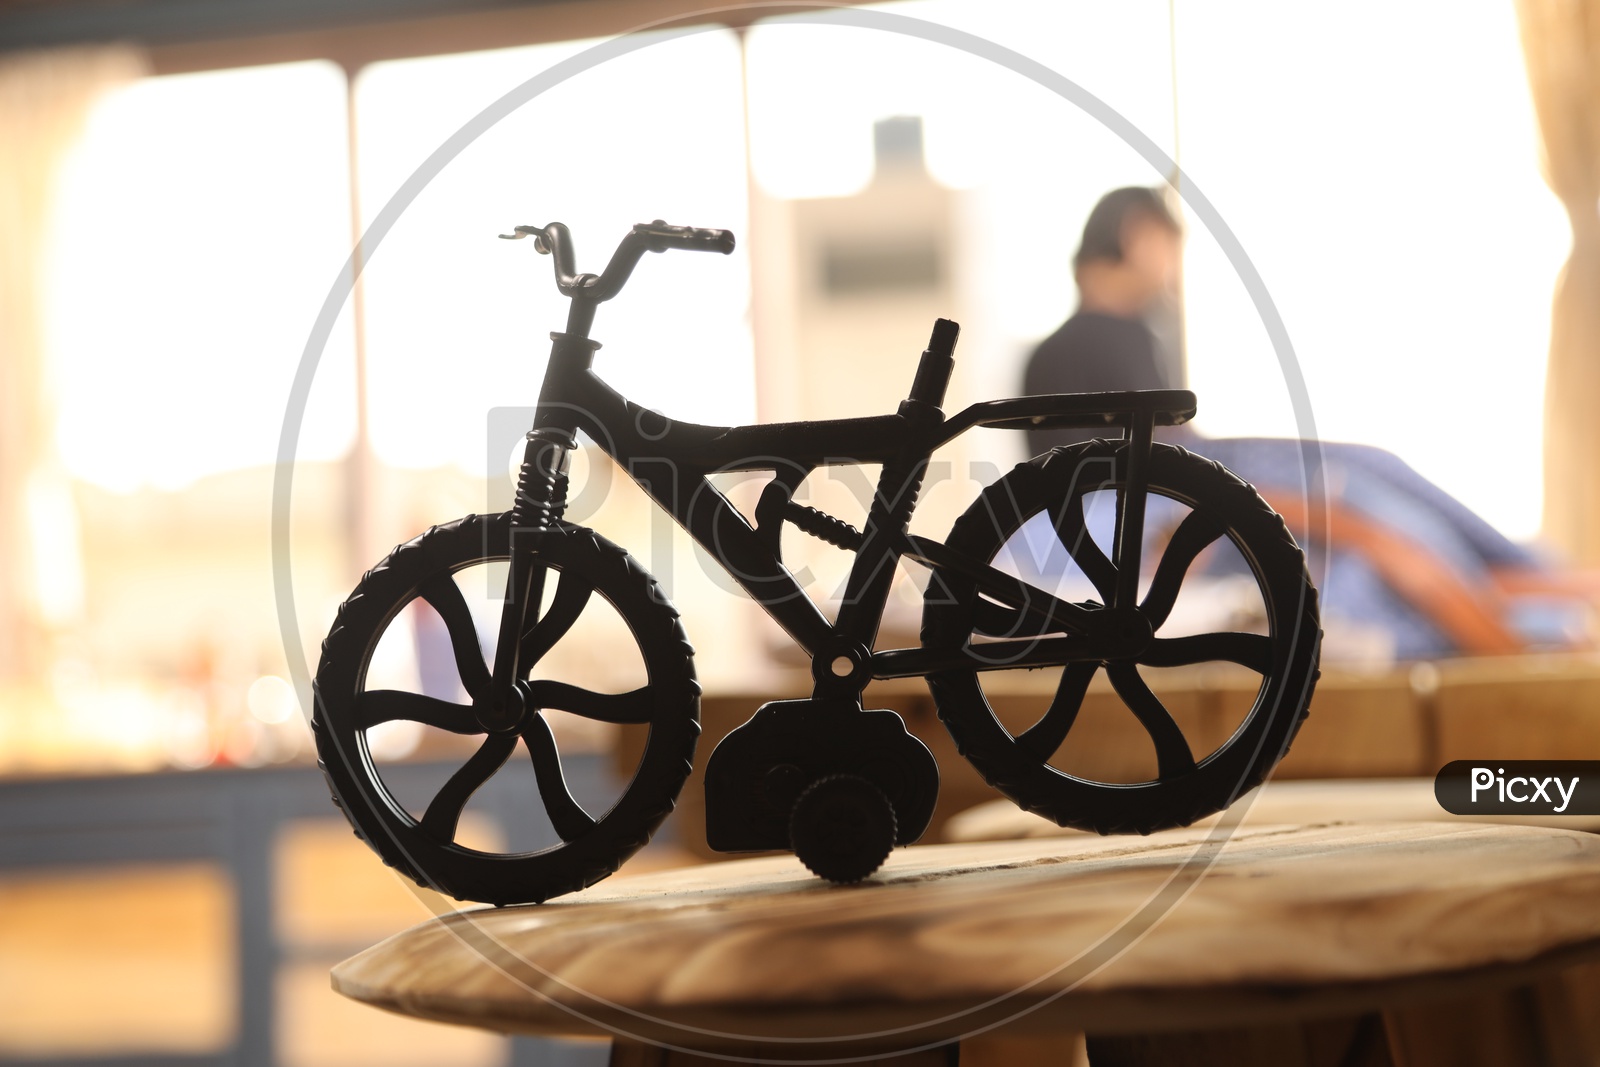 A Cycle Toy or Paper Weight